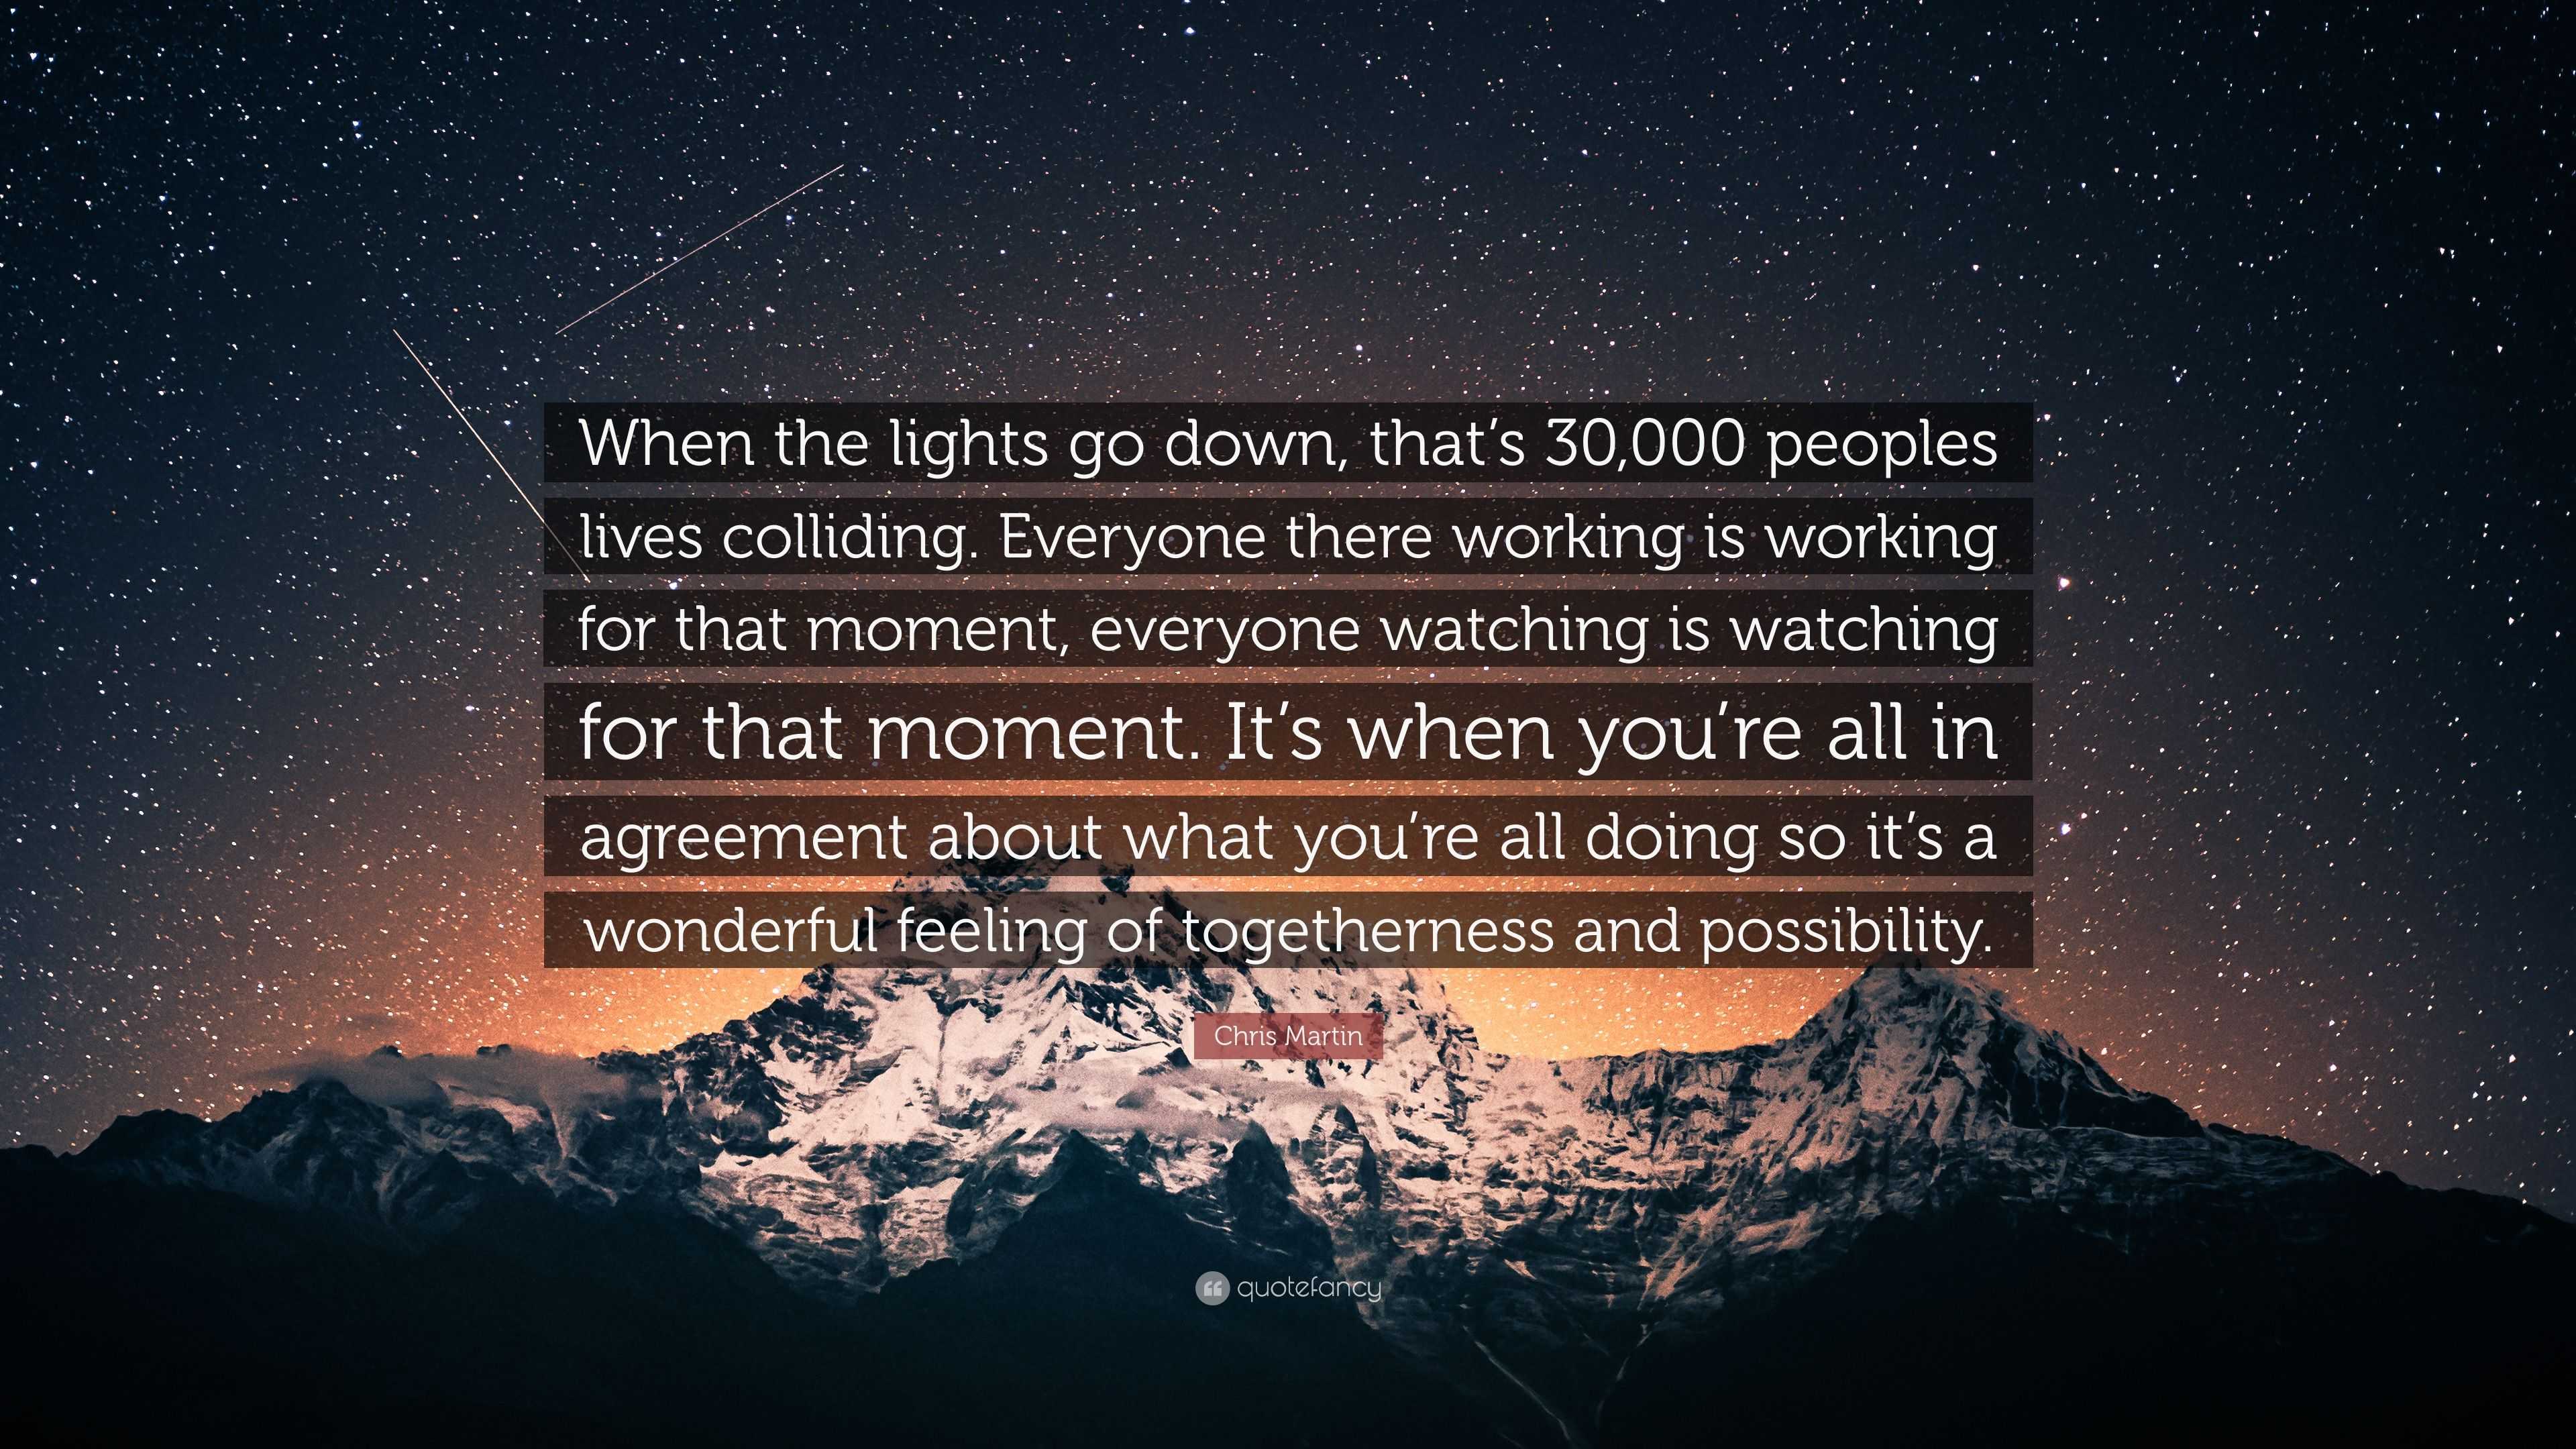 Chris Martin Quote: “When the lights go down, that's lives colliding. Everyone there working is working for that moment, every...”